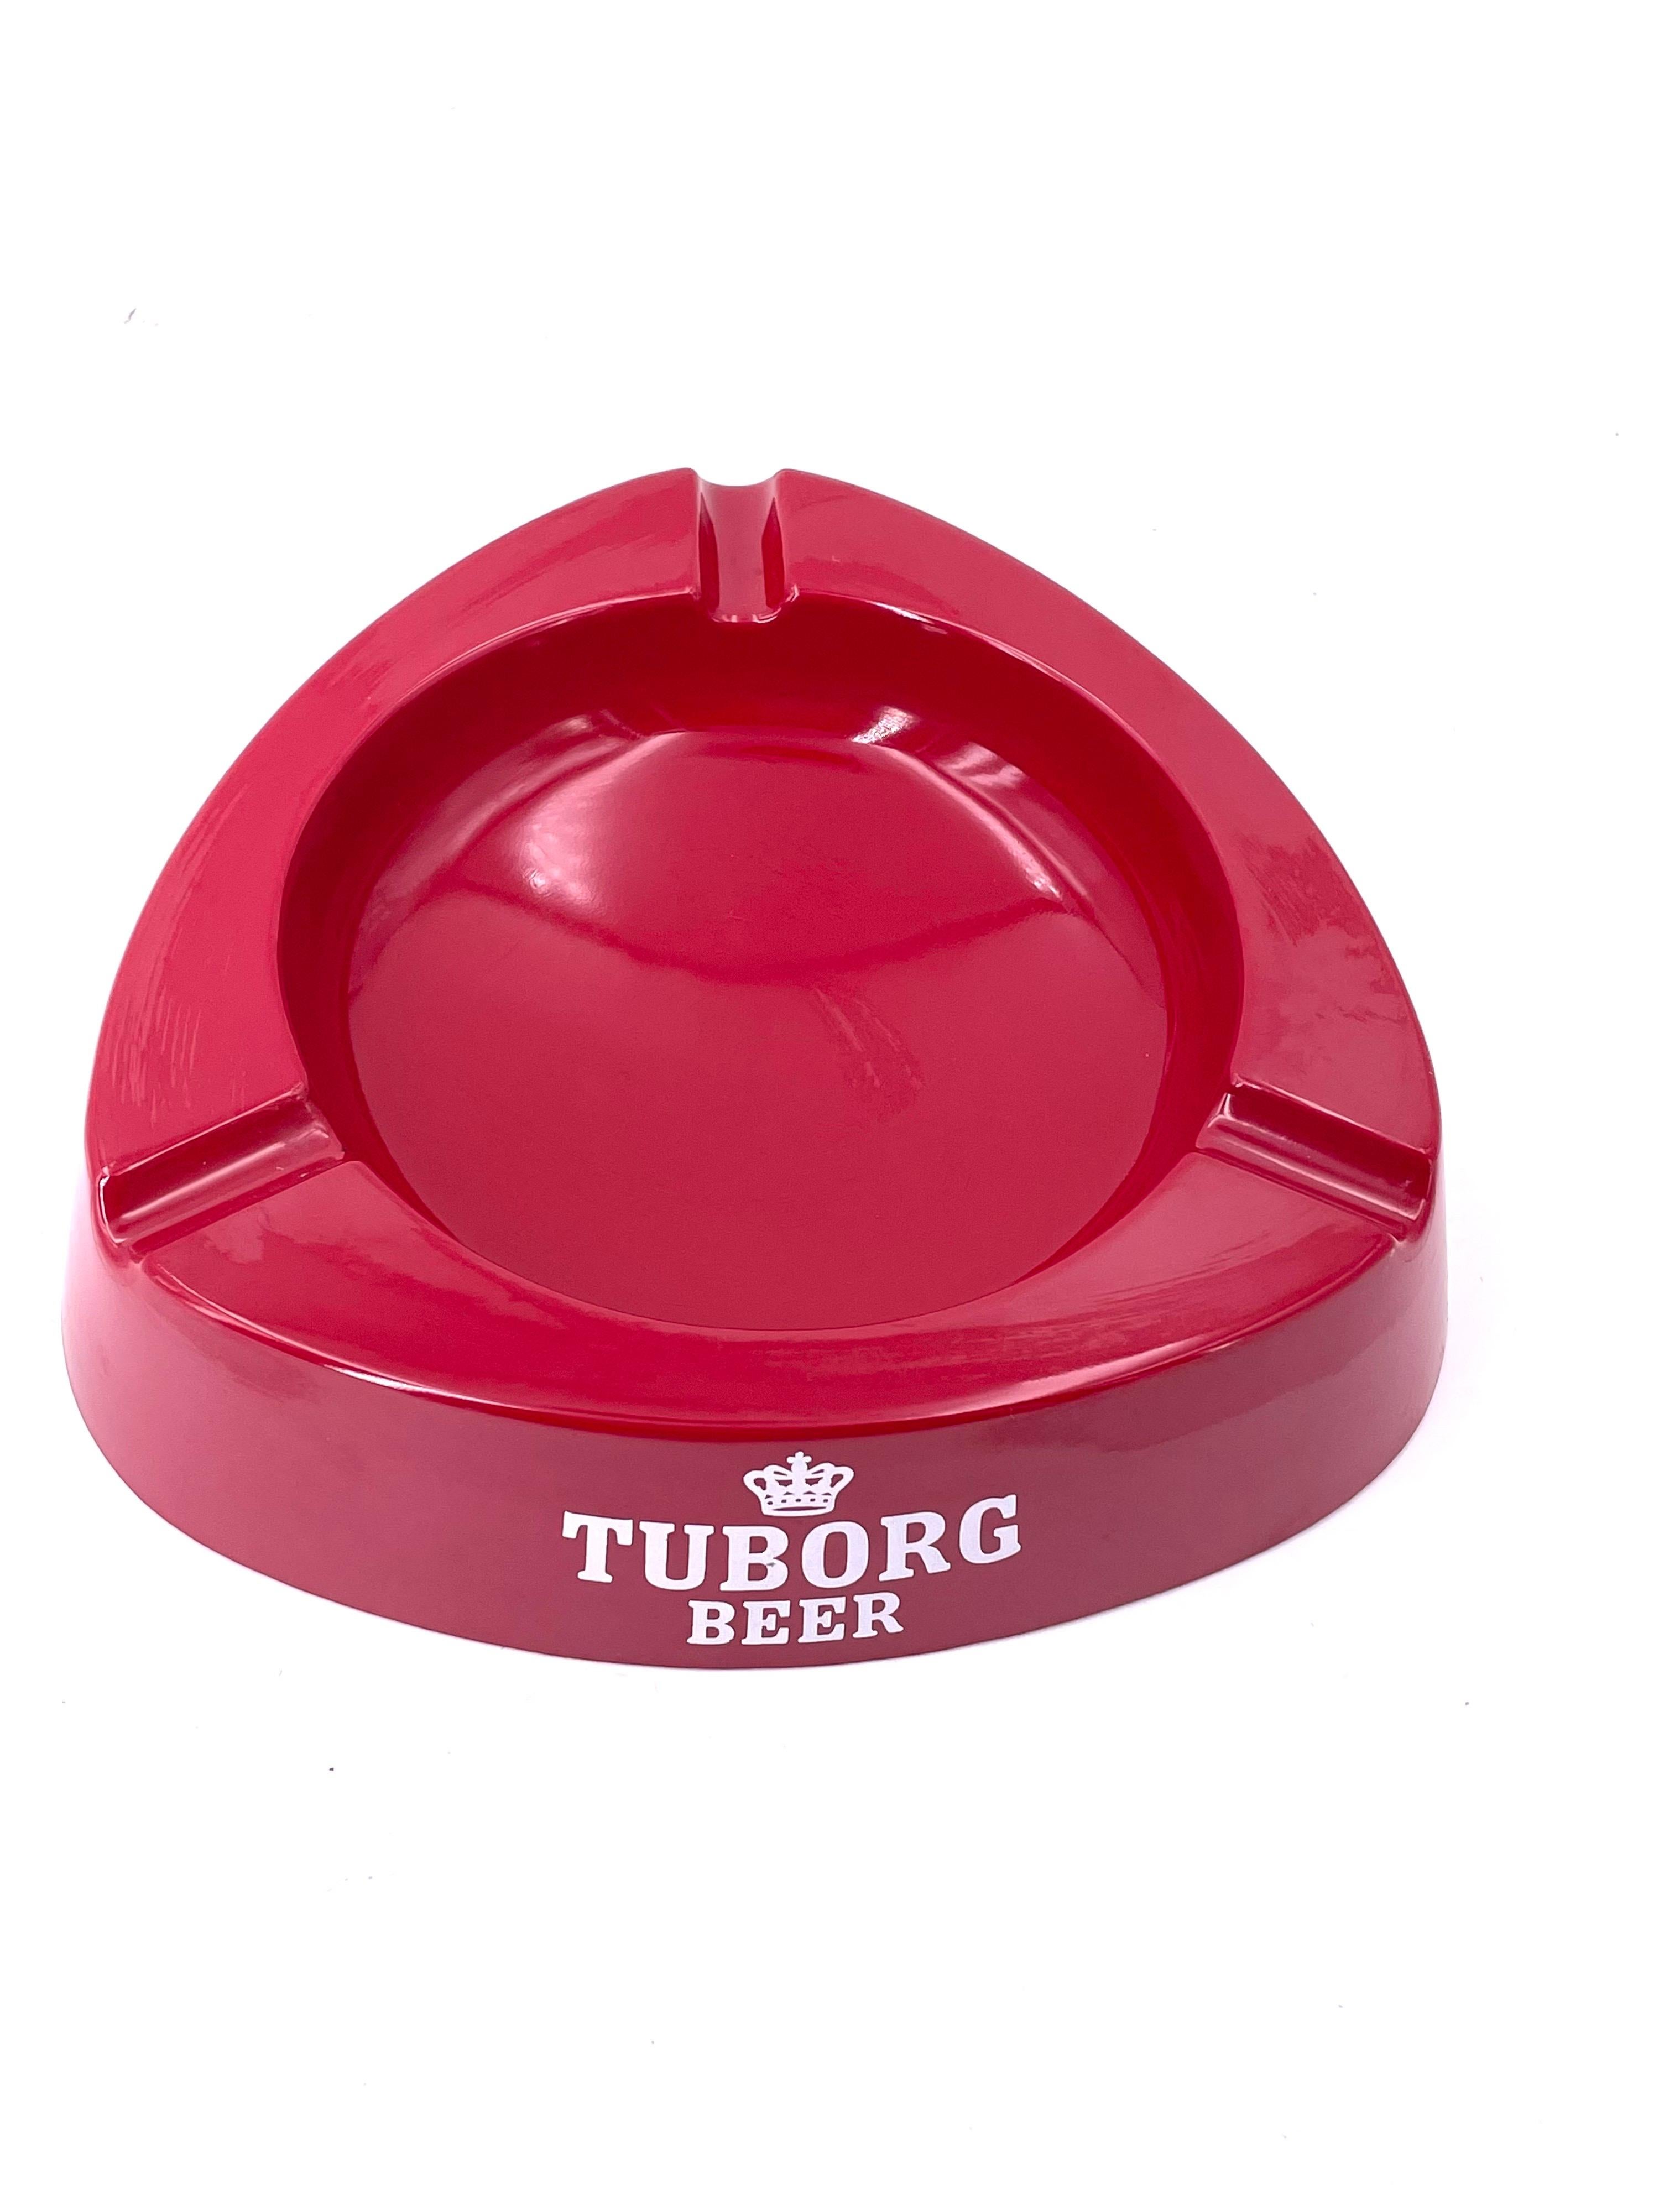 Cool red Space Age large ashtray, circa 1970s in great condition never used made in Italy Milan nice and unique decorative piece from a great era. Advertisement for Danish Beer Tuborg.